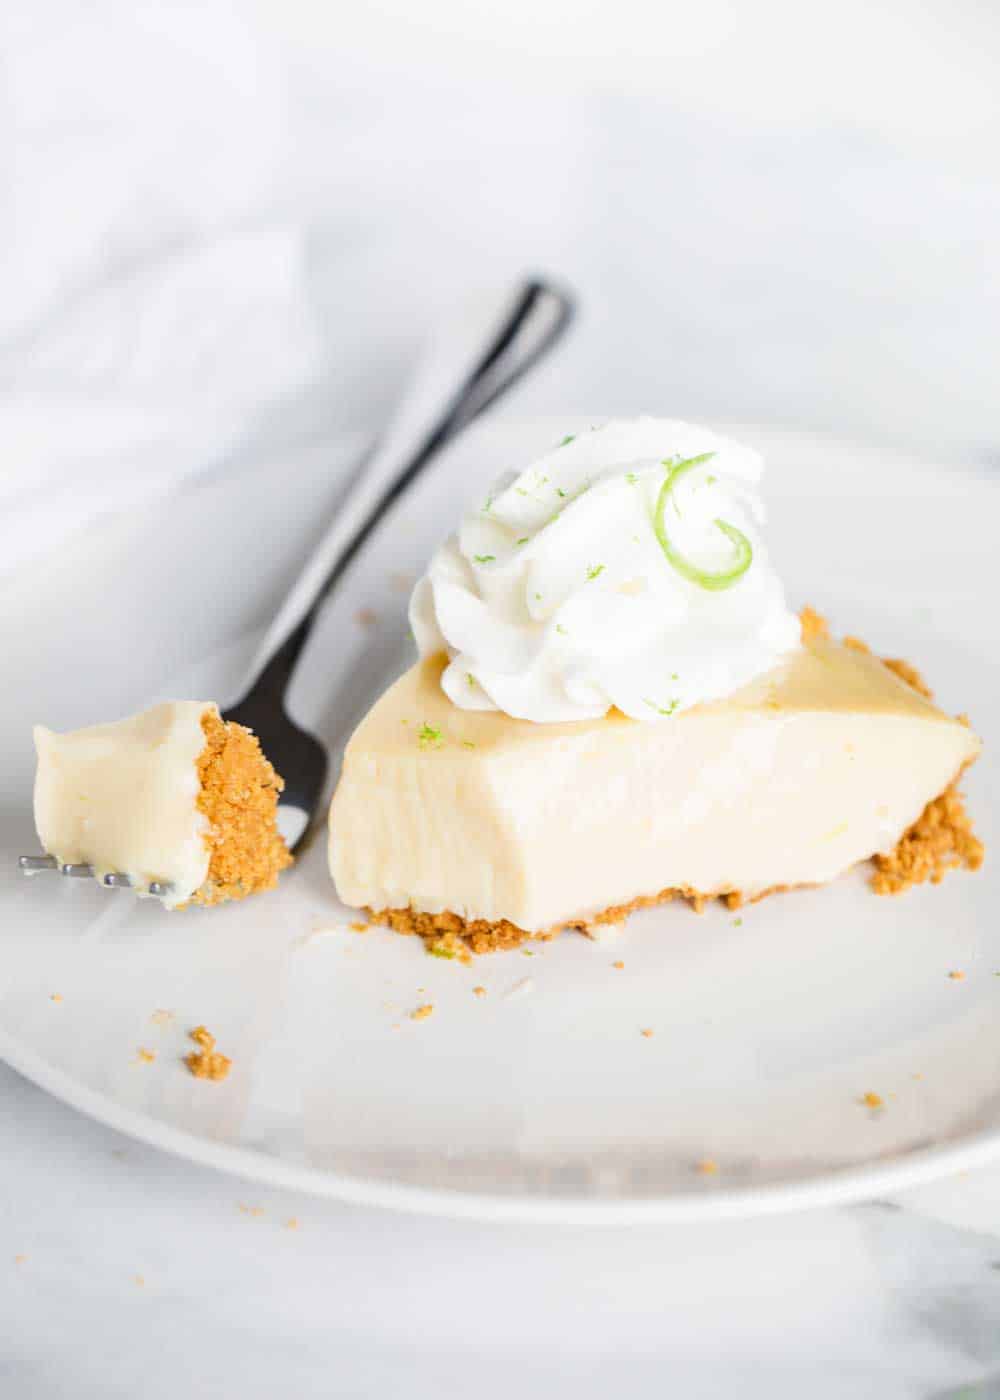 Piece of key lime pie on a white plate.